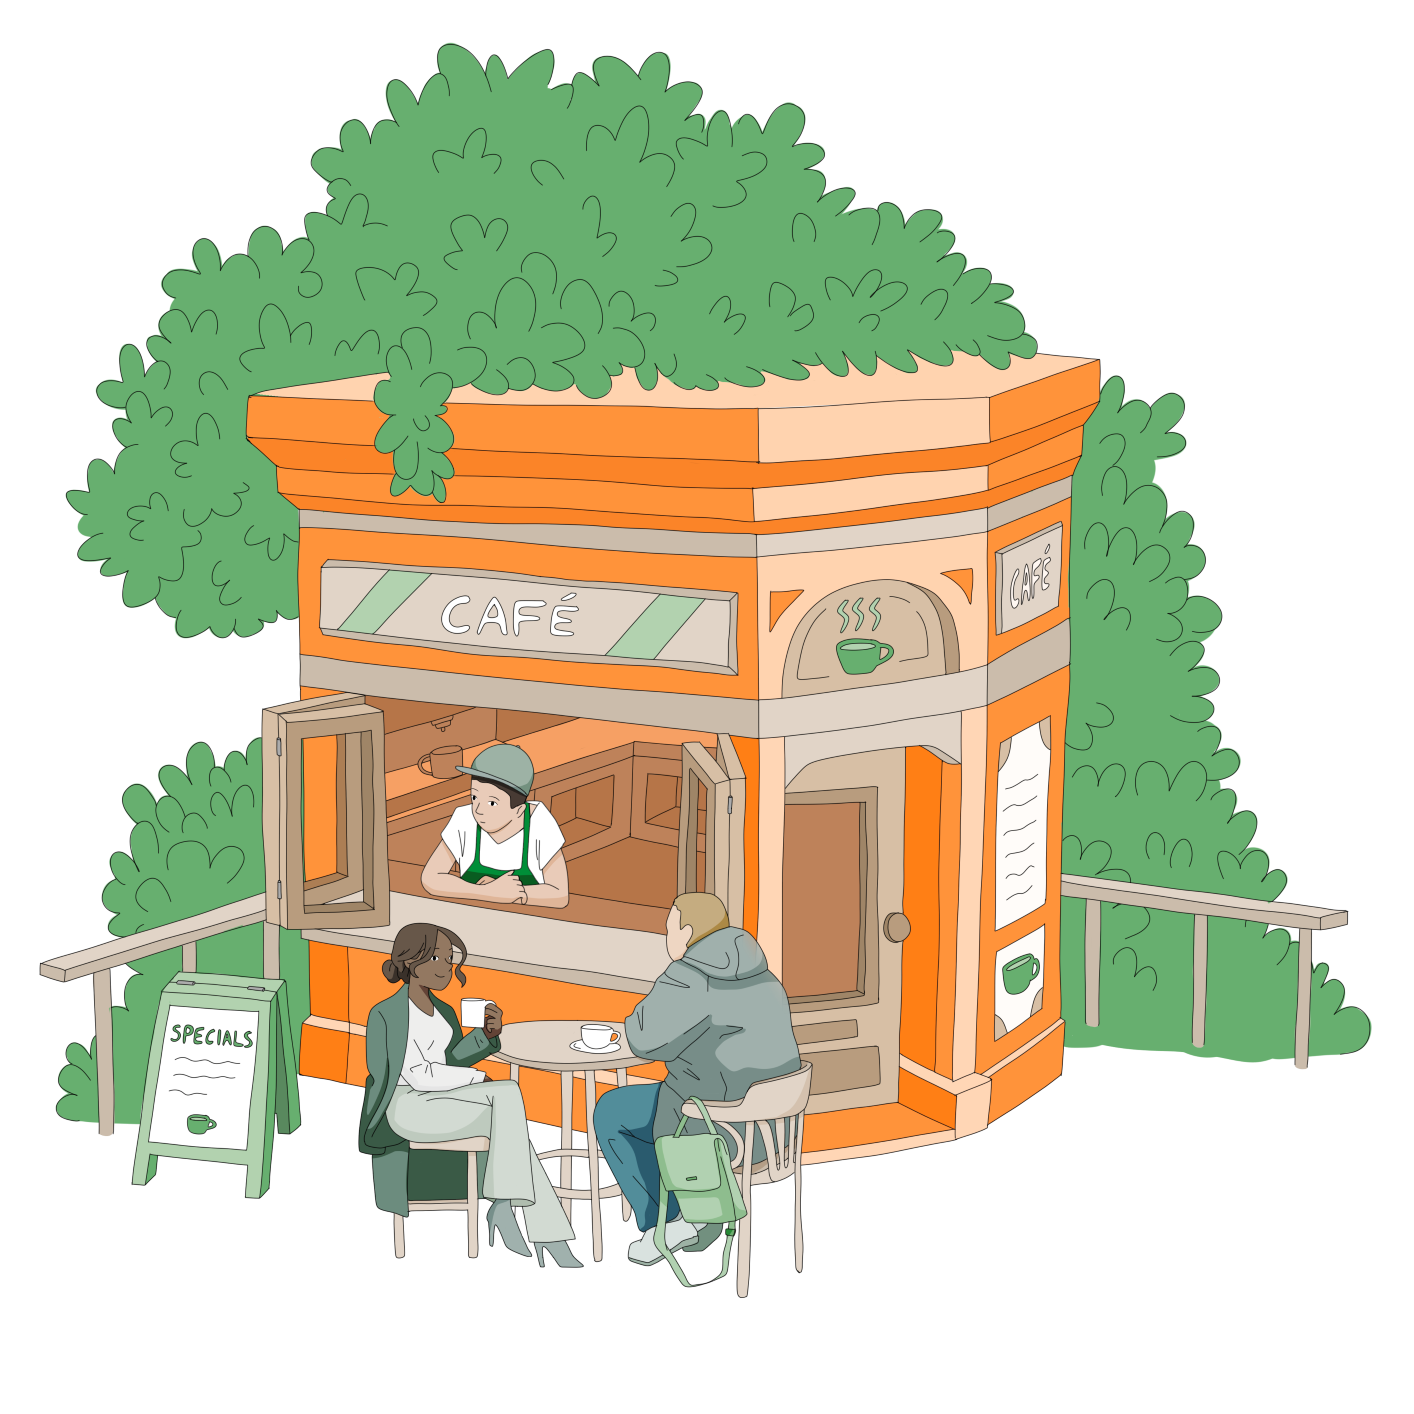 drawing of a cafe shop with customers